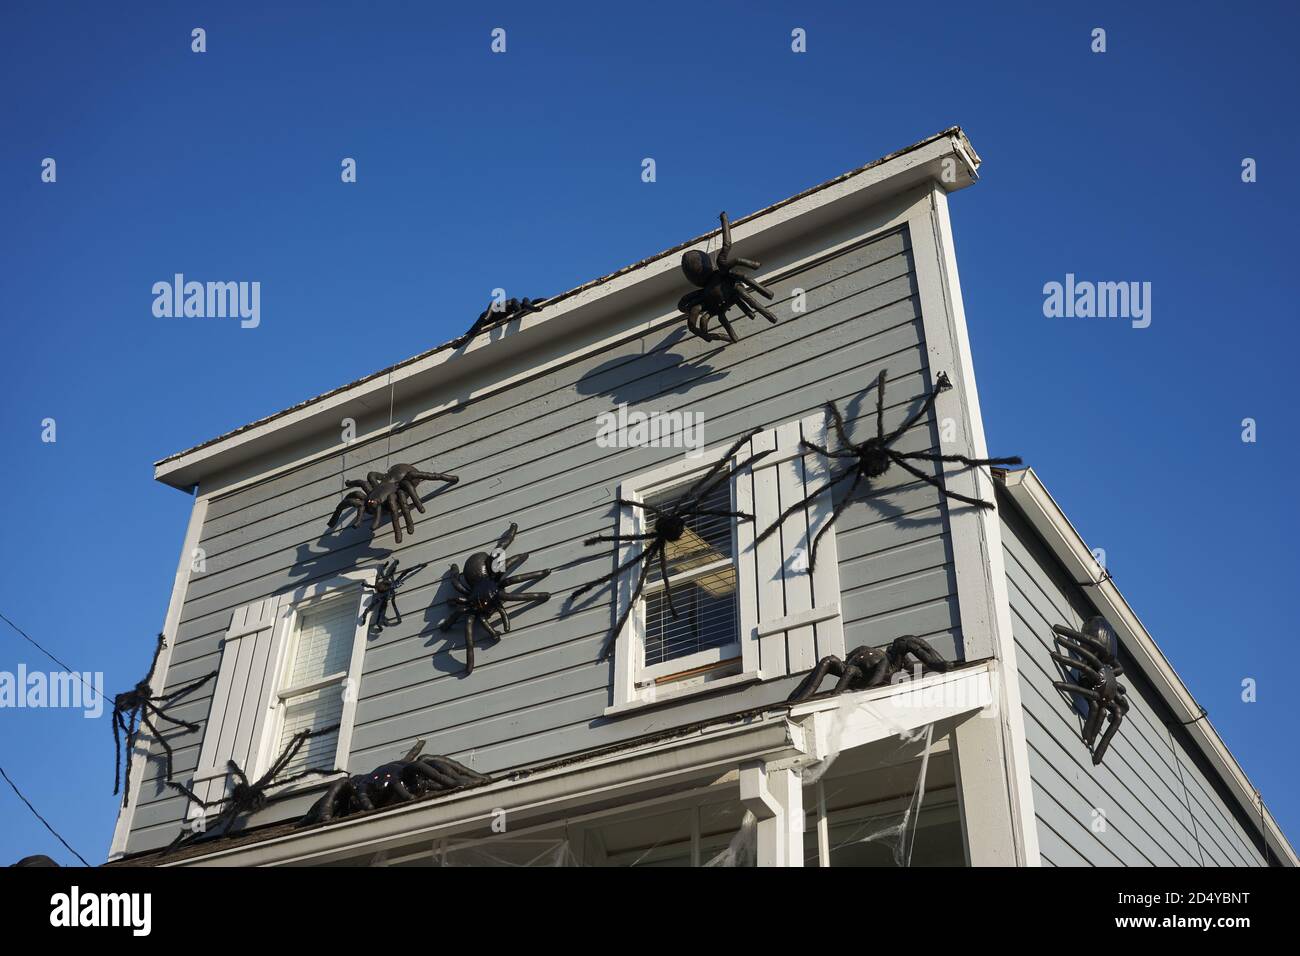 Halloween spider decorations on a residential house. Stock Photo